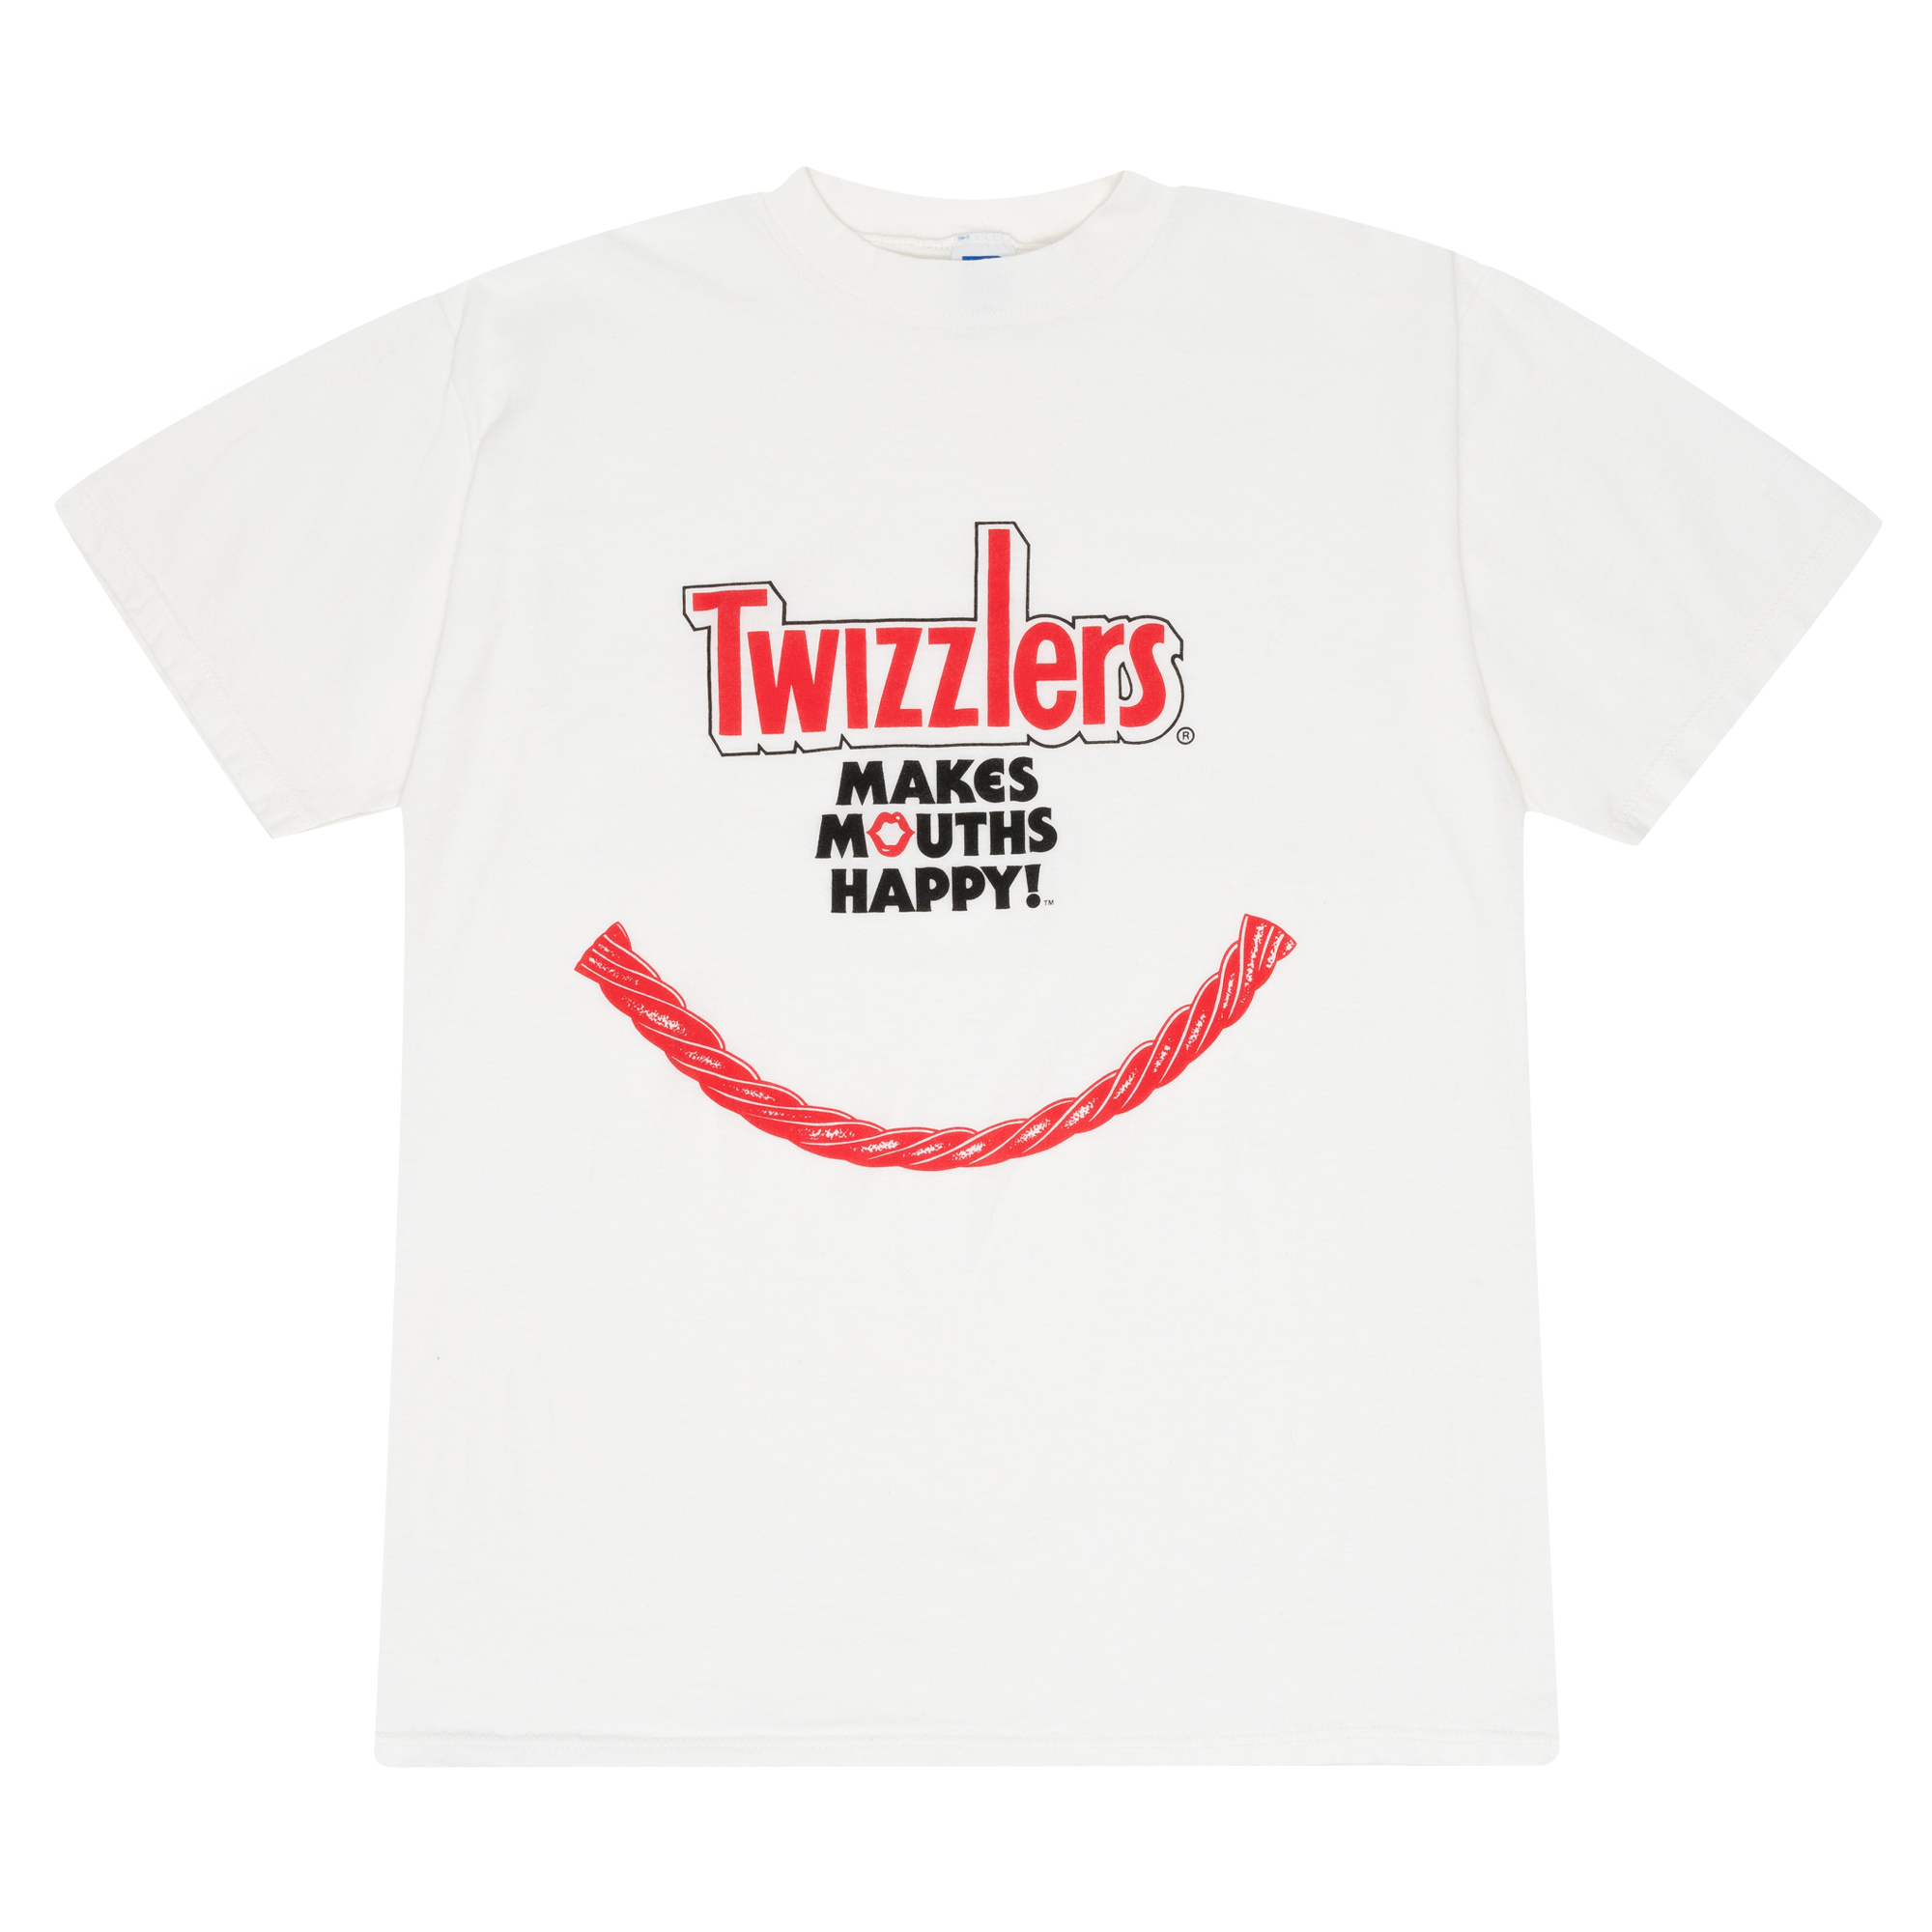 Twizzlers "Makes Mouths Happy" Advertising Tee White-PLUS